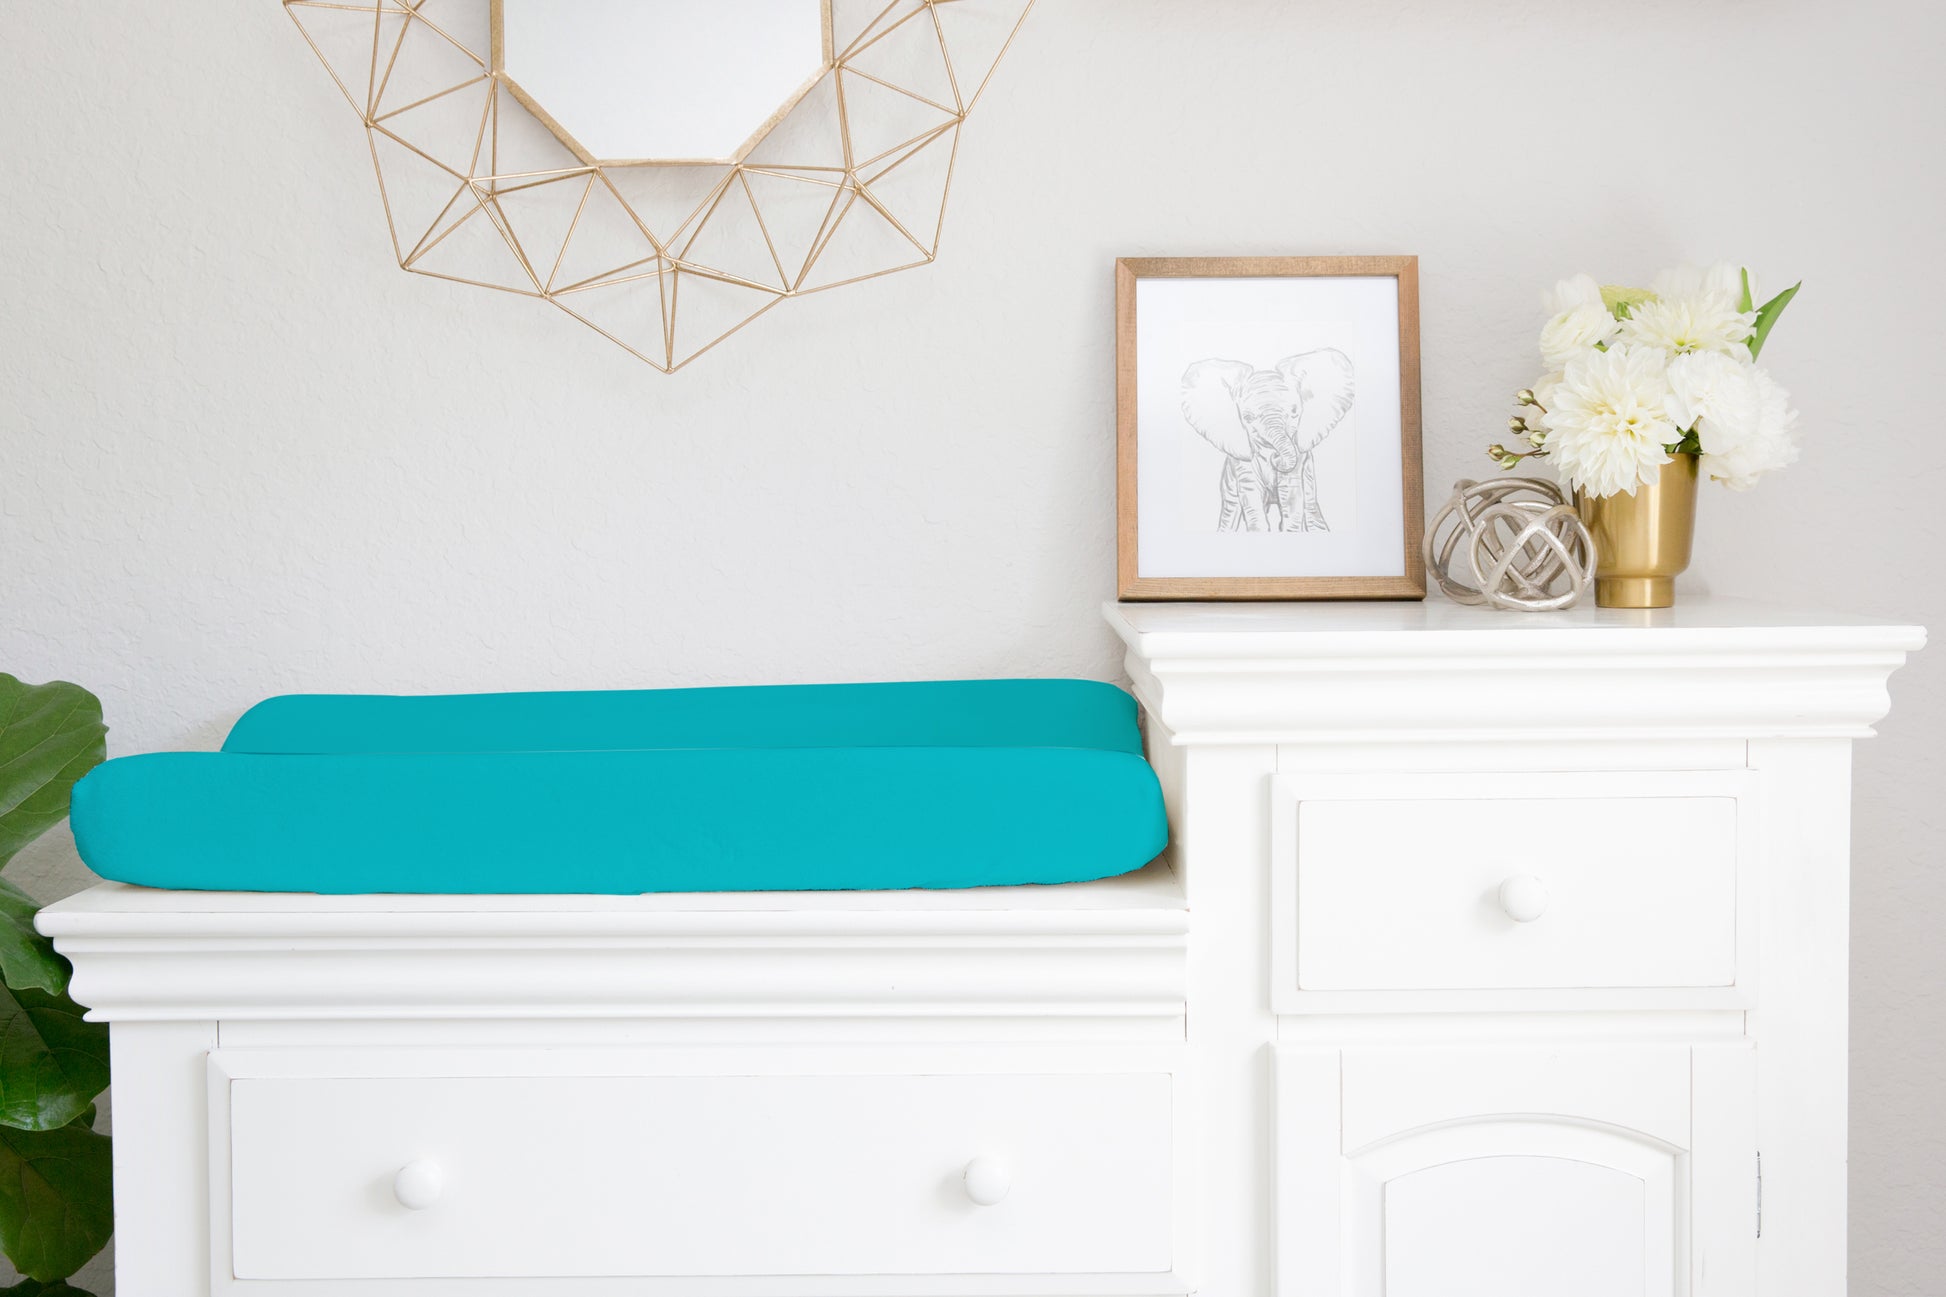 teal changing pad cover